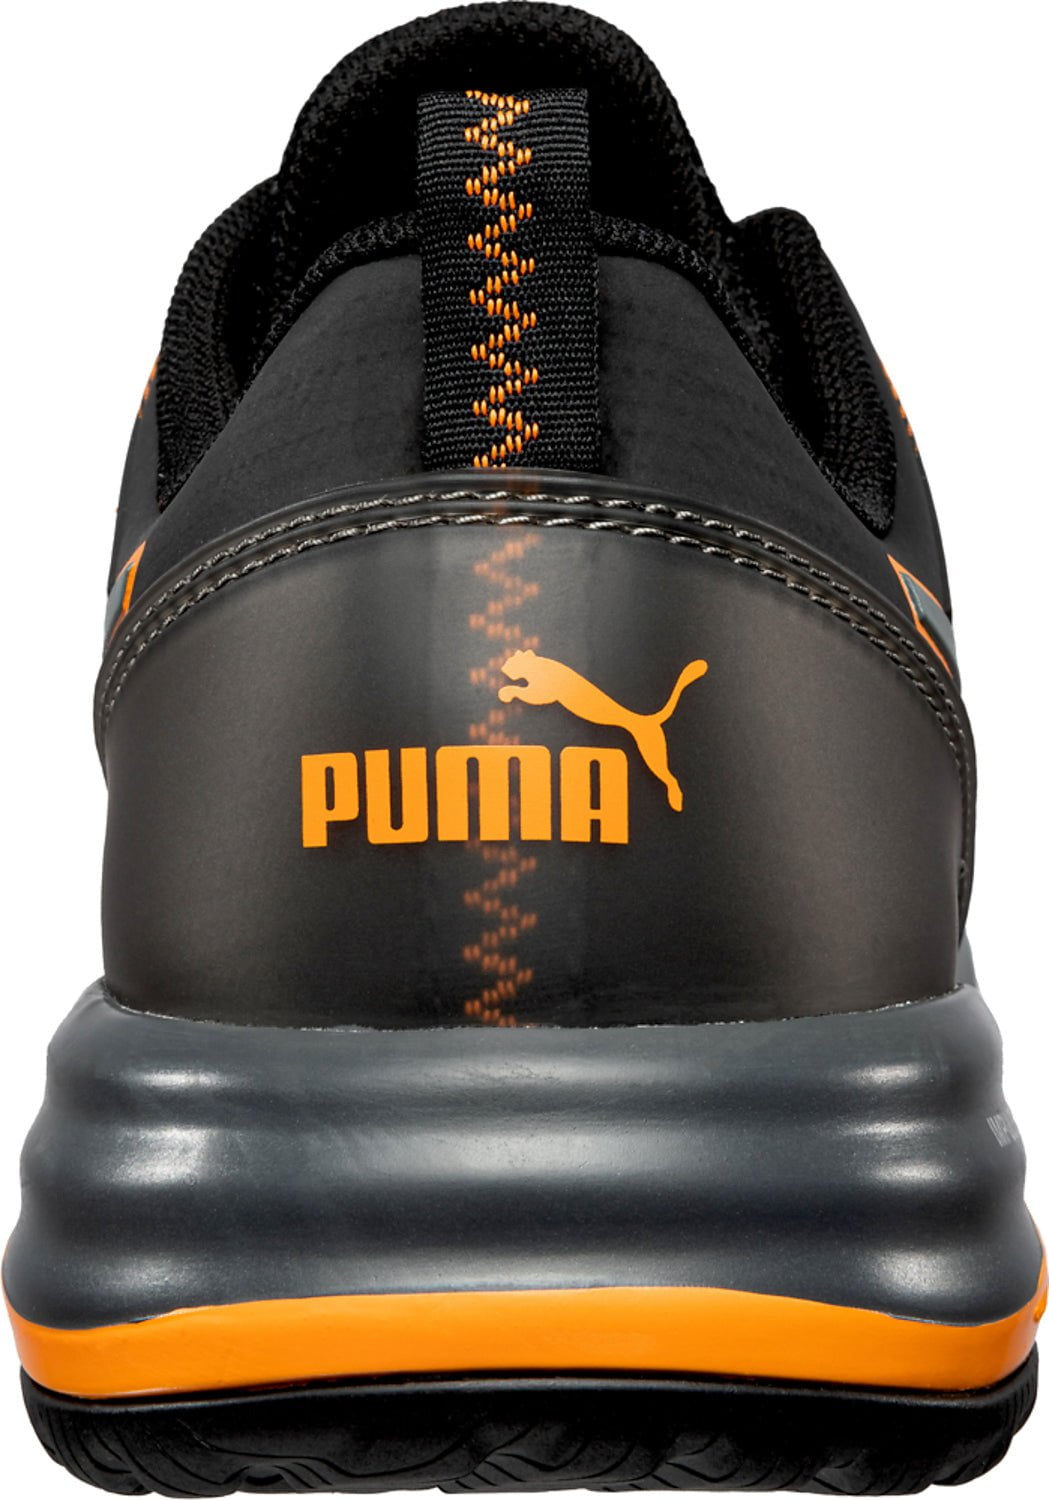 Puma Safety Orange/Black Mens Mesh Charge Low EH CT Work Shoes – The  Western Company | Sicherheitsschuhe